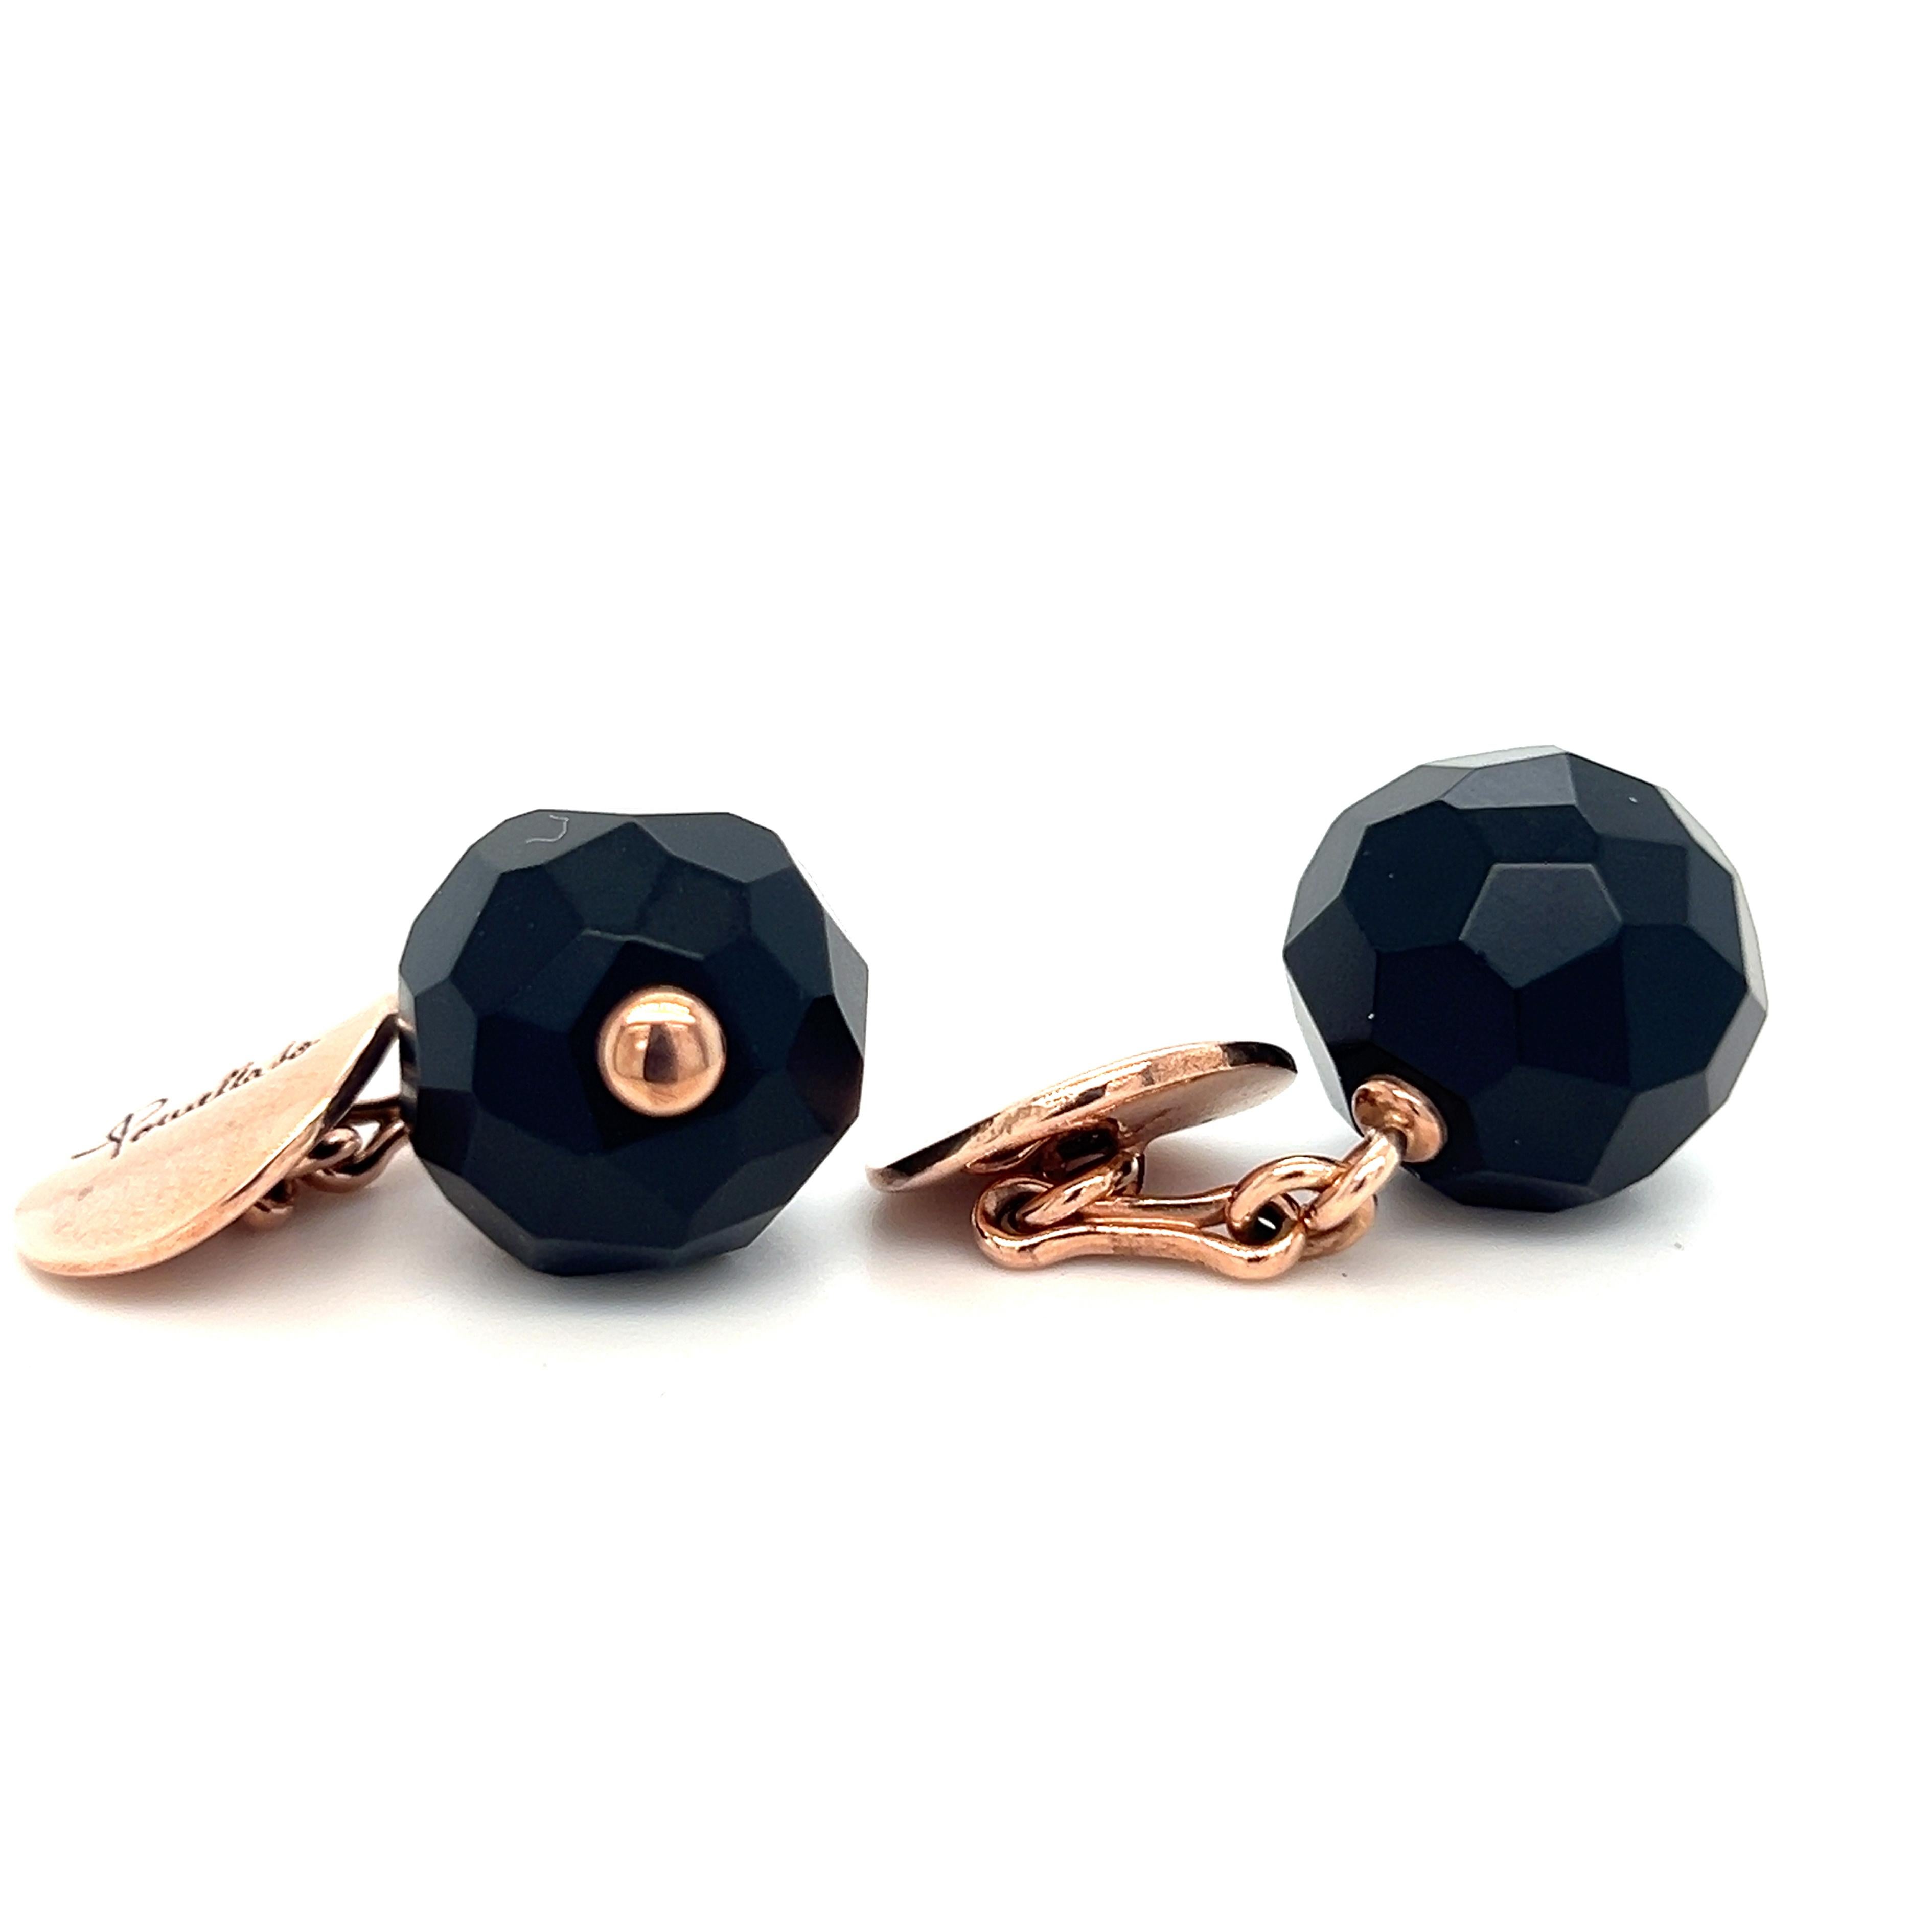 Original 2012, Faceted Jet Ball Pomellato Cufflinks,  Rose Gold Setting(G.A910/OV/9).
This extremely versatile, wearable piece is perfect with any attire: Handcrafted in Rose Gold with an Hand Inlaid Round Faceted Iridescent Jet Ball.. the final